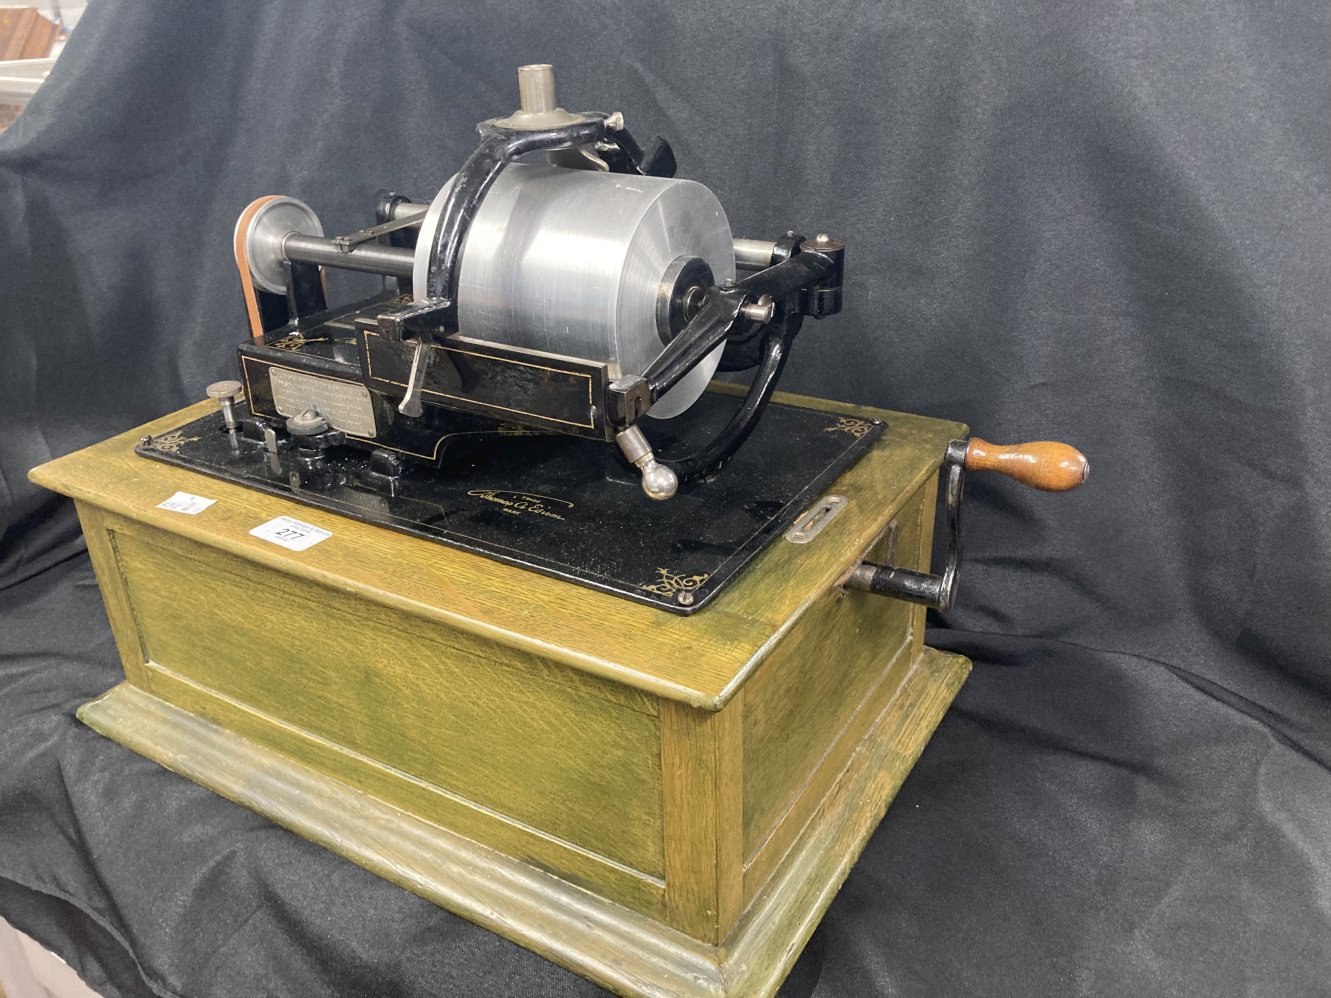 Mechanical Music Property of Local Collector. Edison Duplex Cylinder Phonograph serial no. C10576 - Image 5 of 9